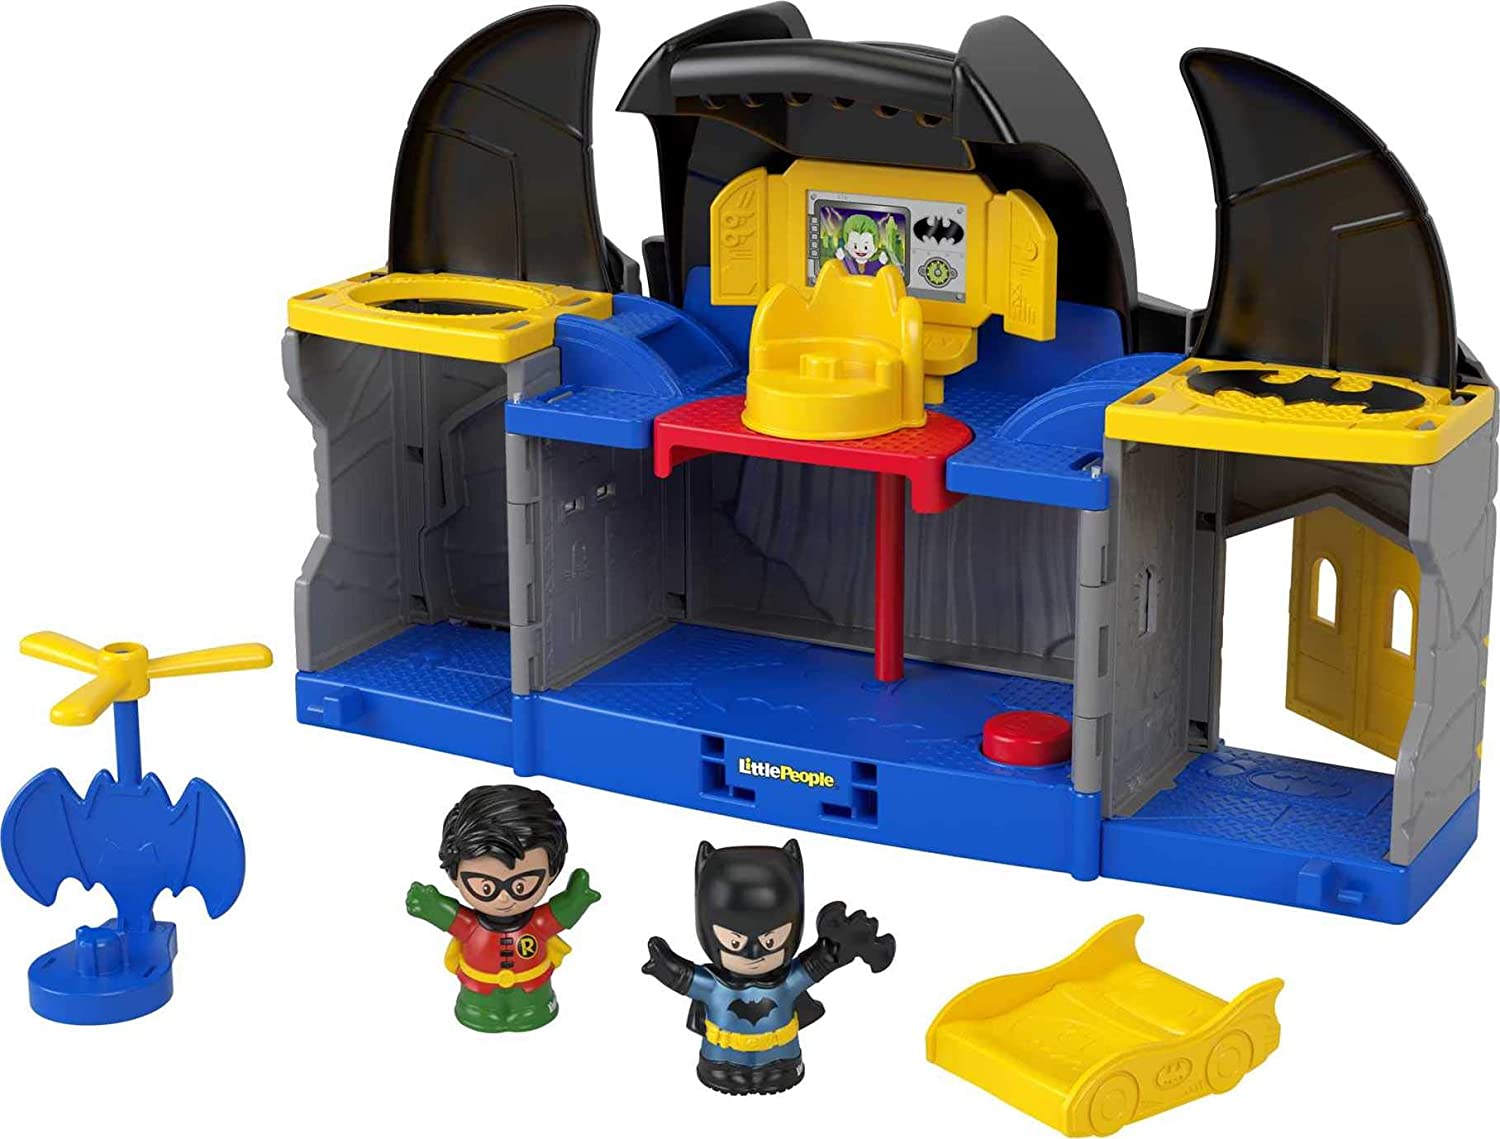 Fisher-Price Little People DC Super Friends Batcave Batman Playset w/ Figures $13.10 + Free Shipping w/ Walmart+ or $35+